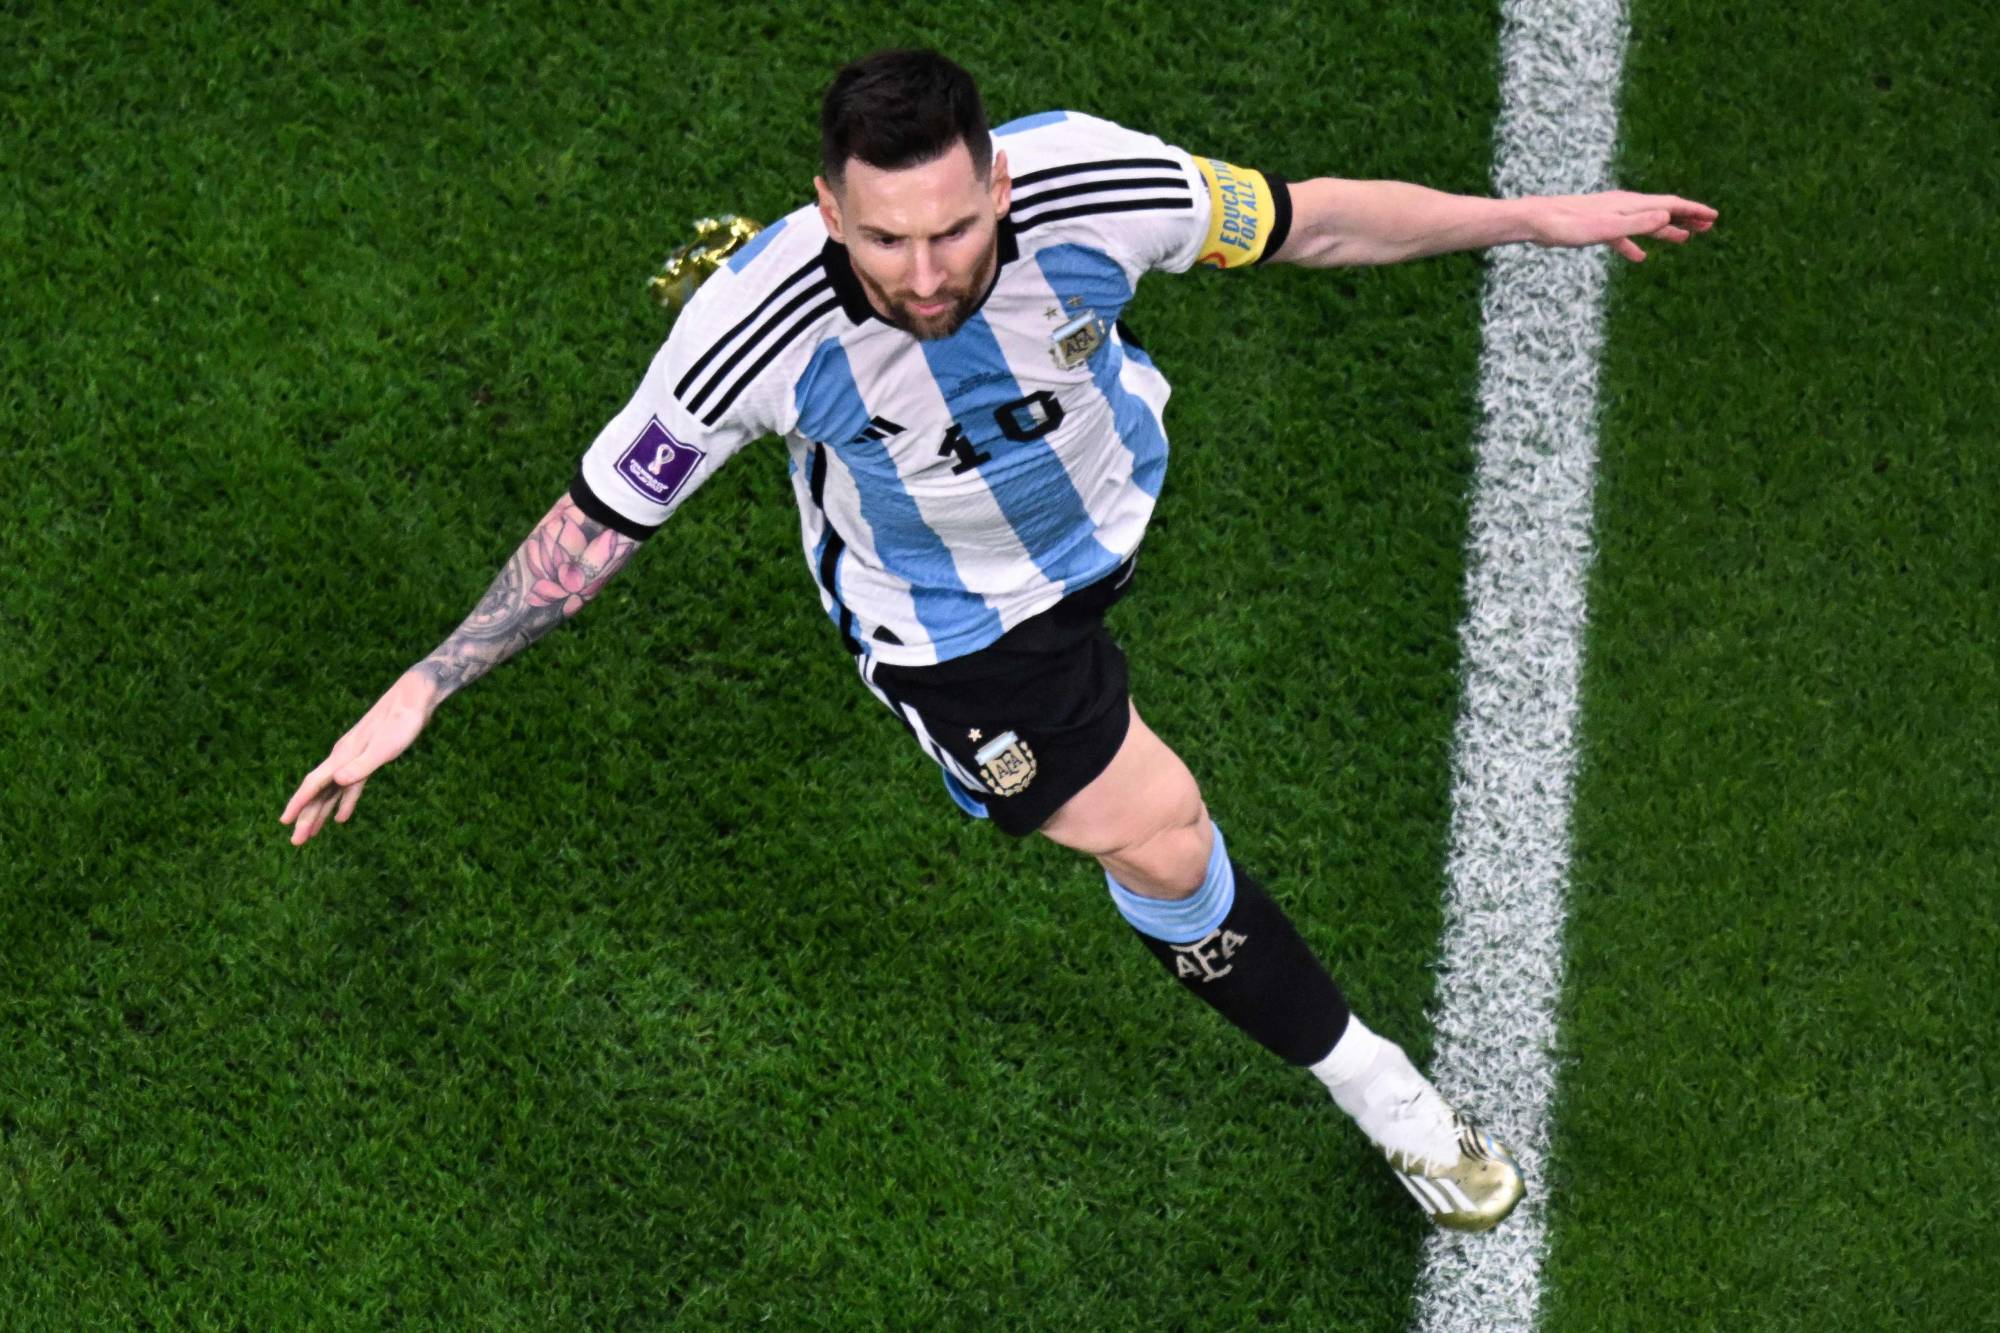 Messi carries the load to help Argentina into the quarterfinals